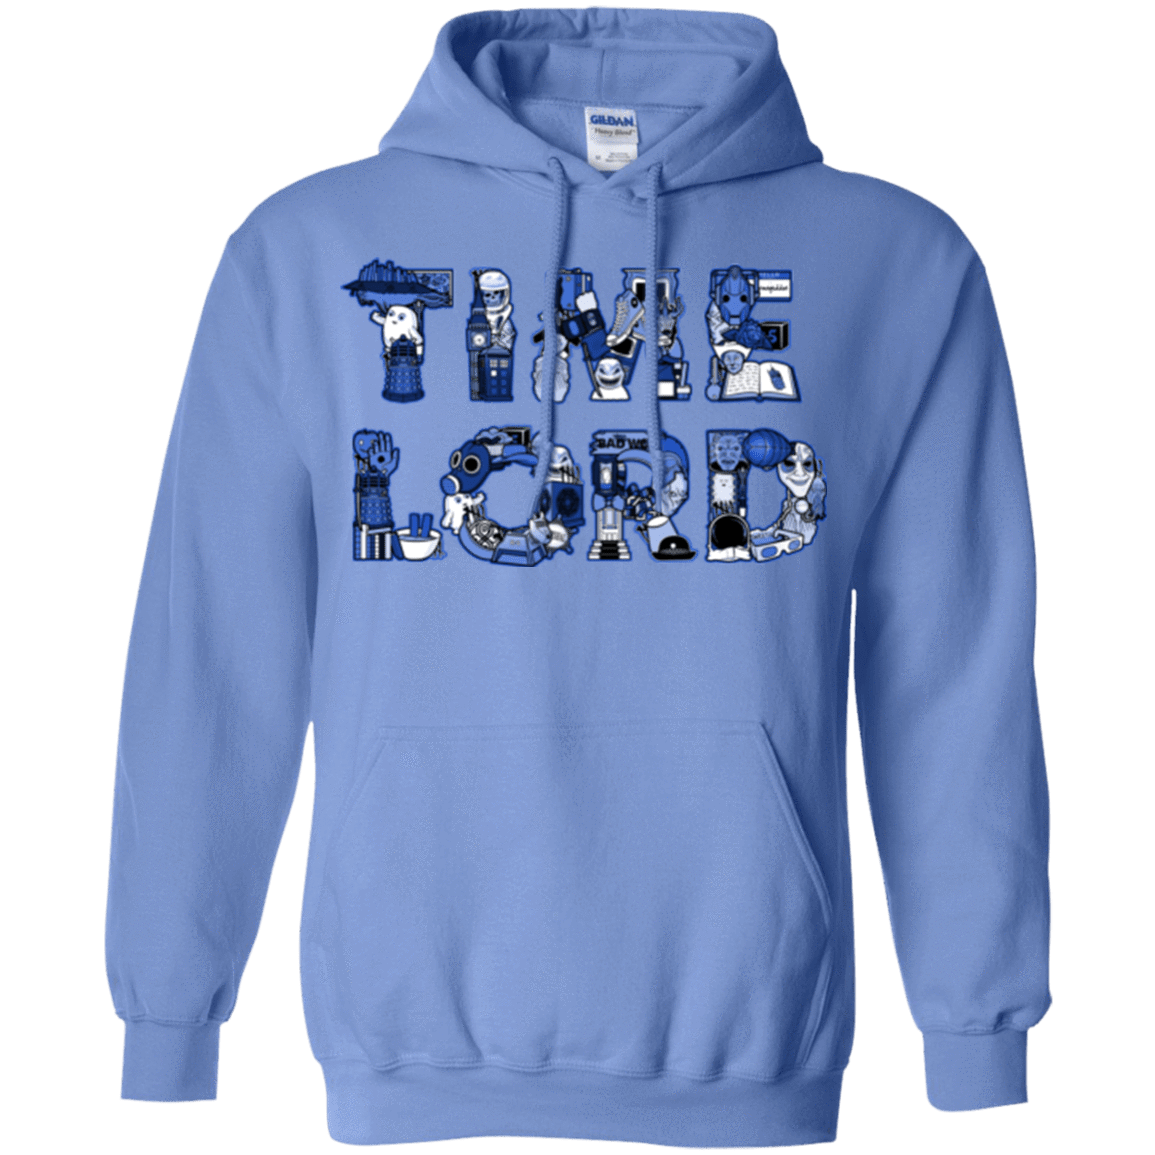 Sweatshirts Carolina Blue / Small Timelord Pullover Hoodie